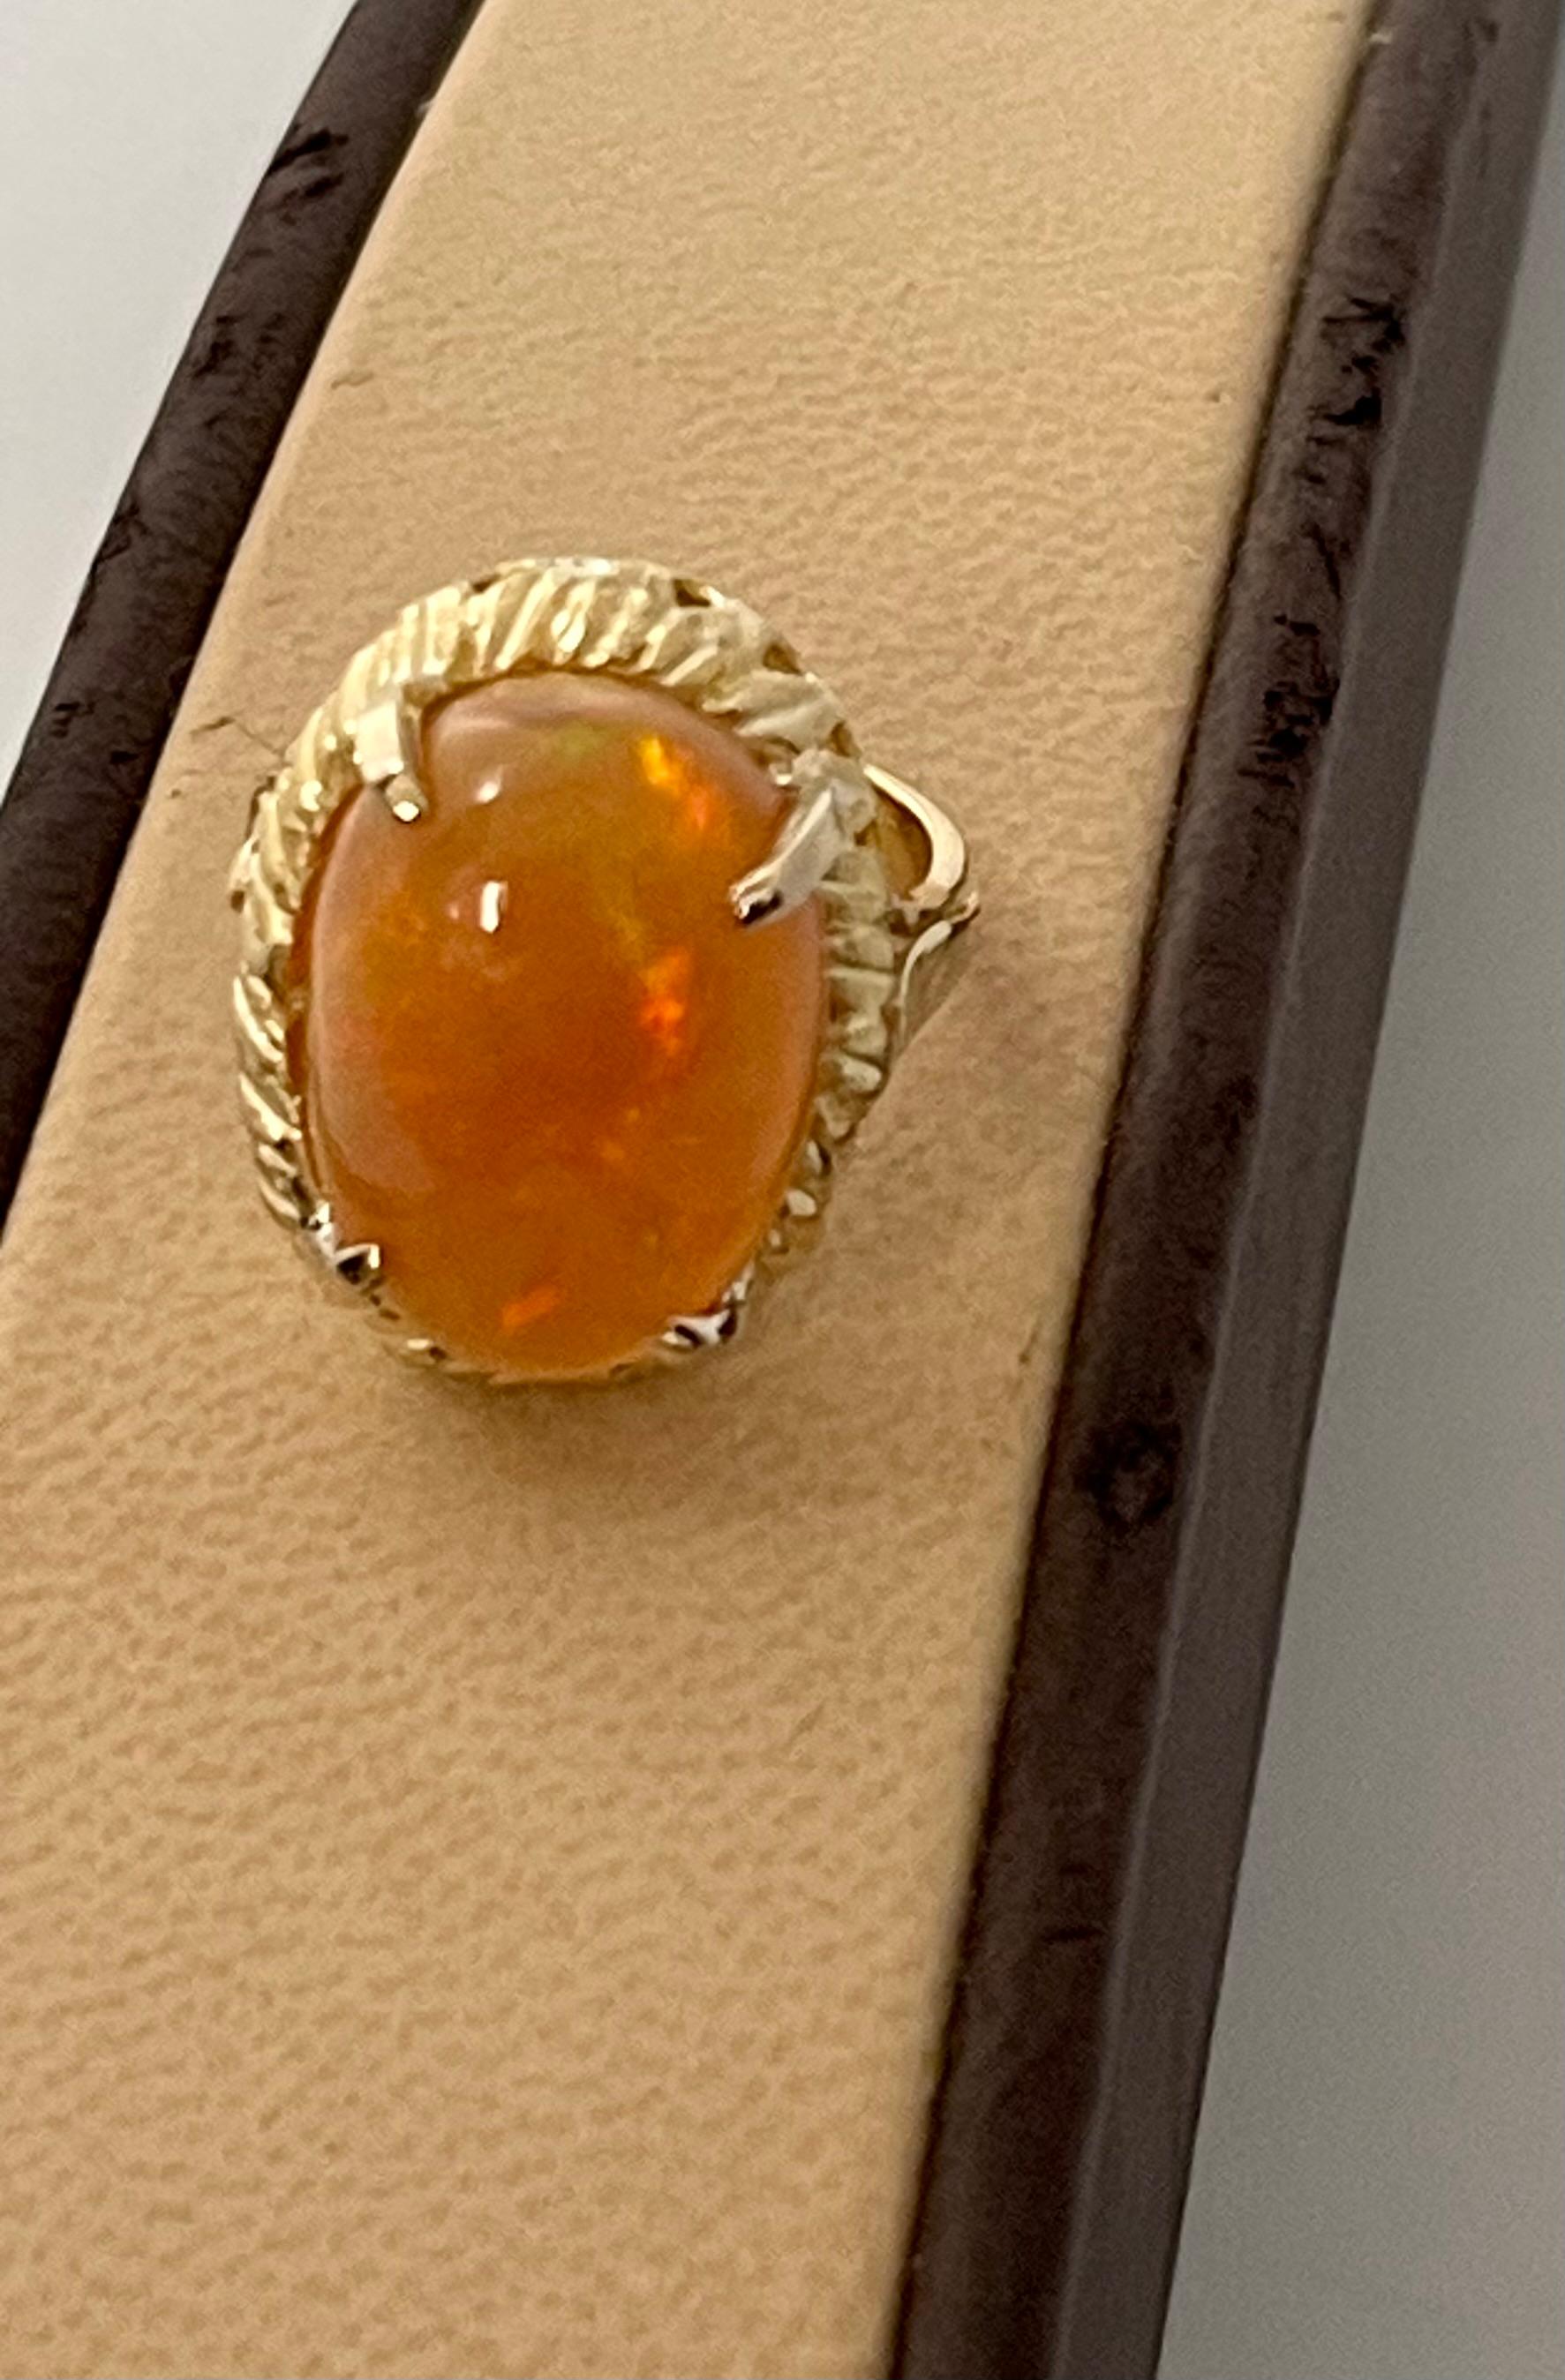 14 Carat Oval Shape Ethiopian Opal Cocktail Ring 14 Karat Yellow Gold Solid Ring In Excellent Condition For Sale In New York, NY